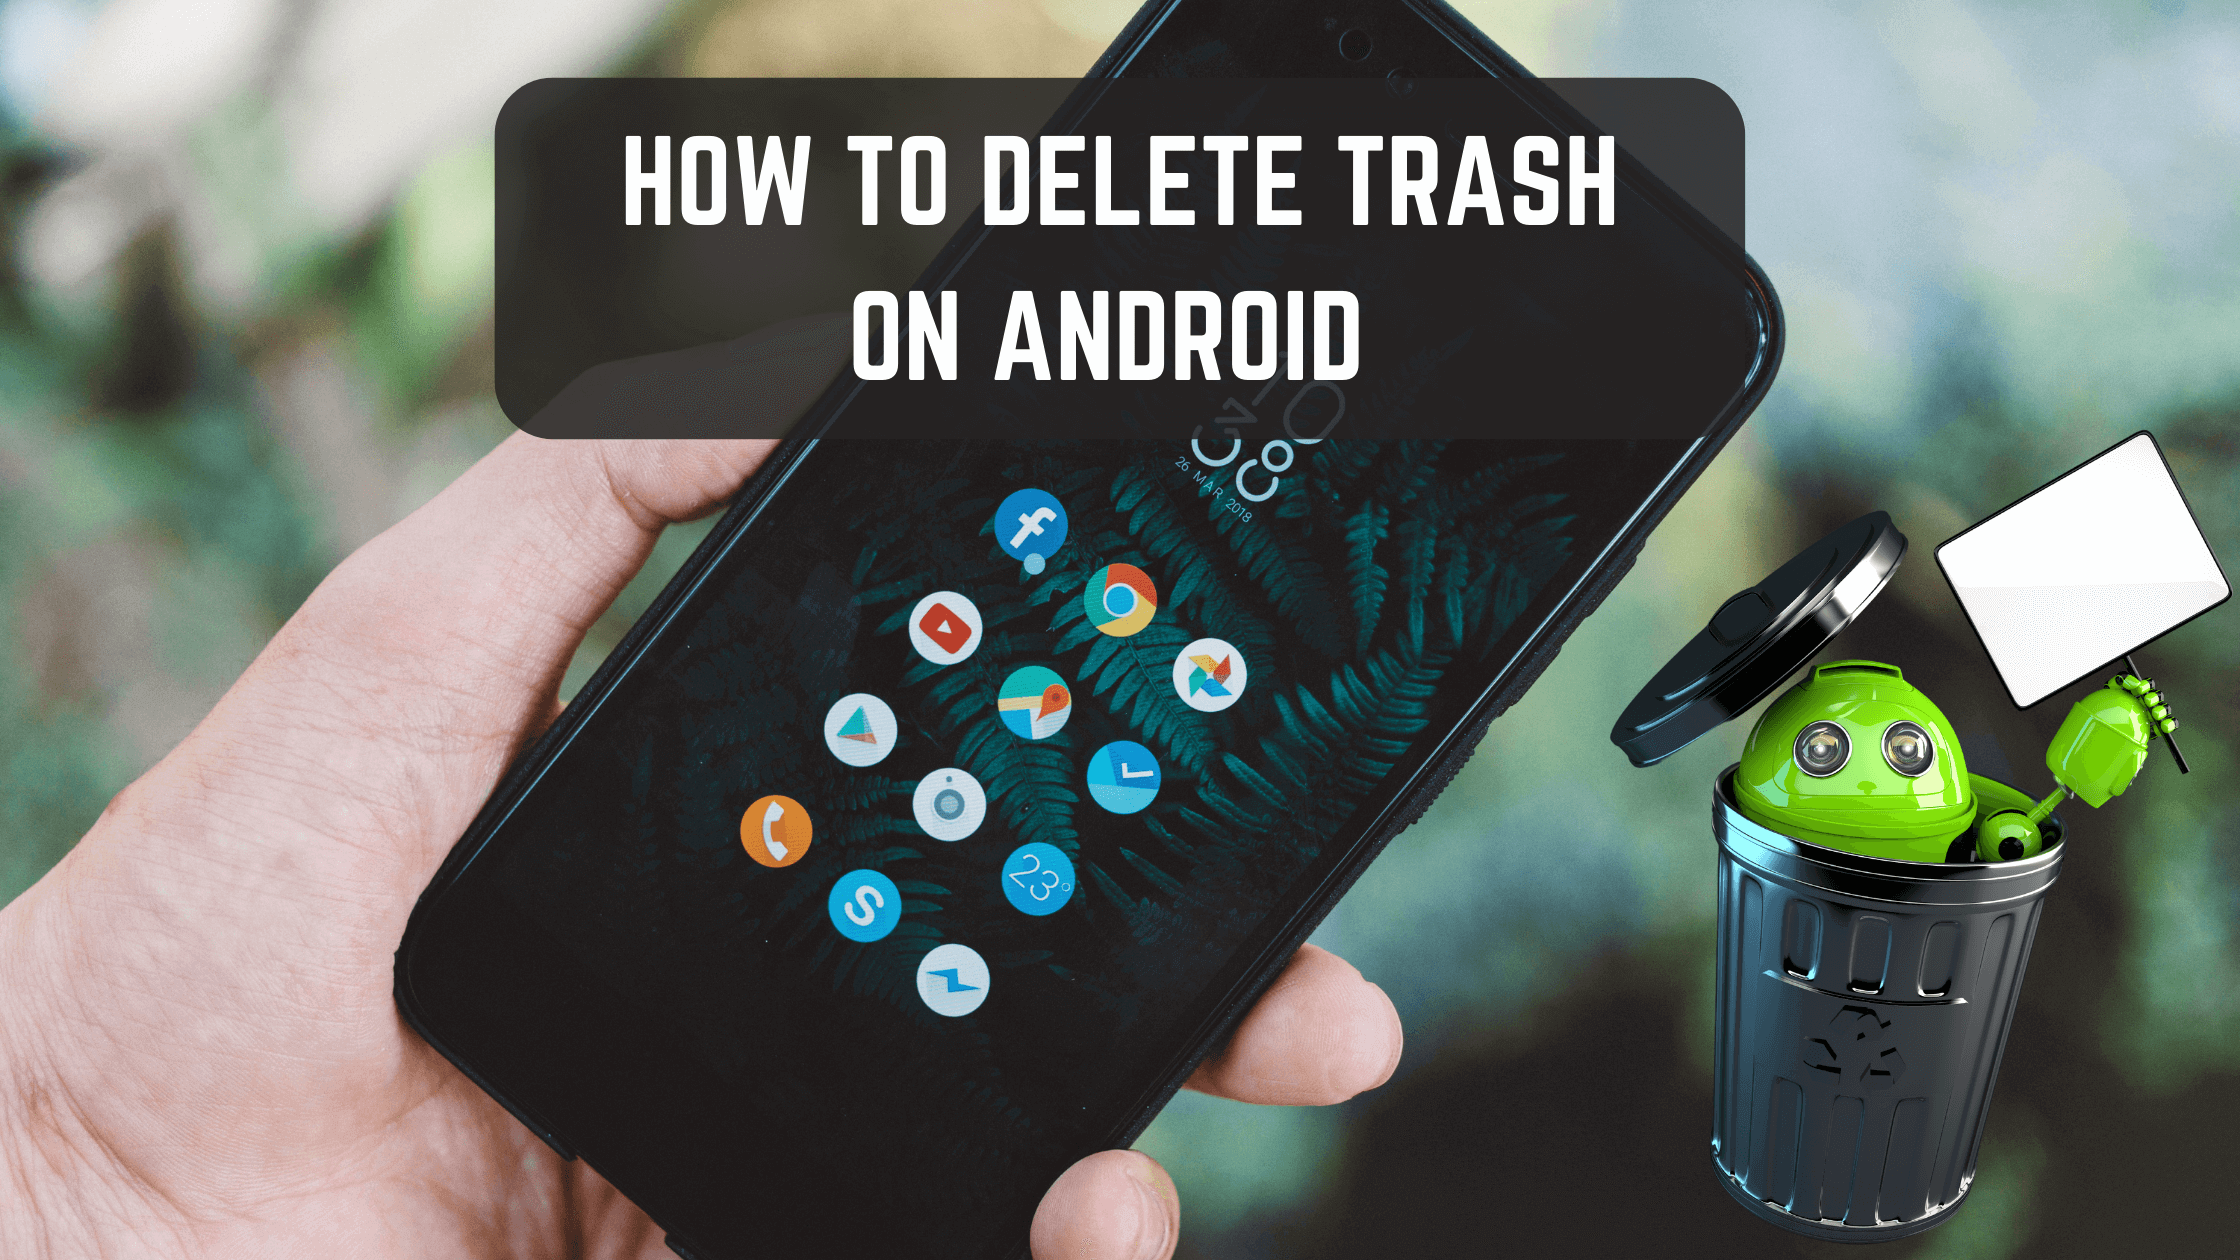 how to delete trash on android, how to empty trash on android